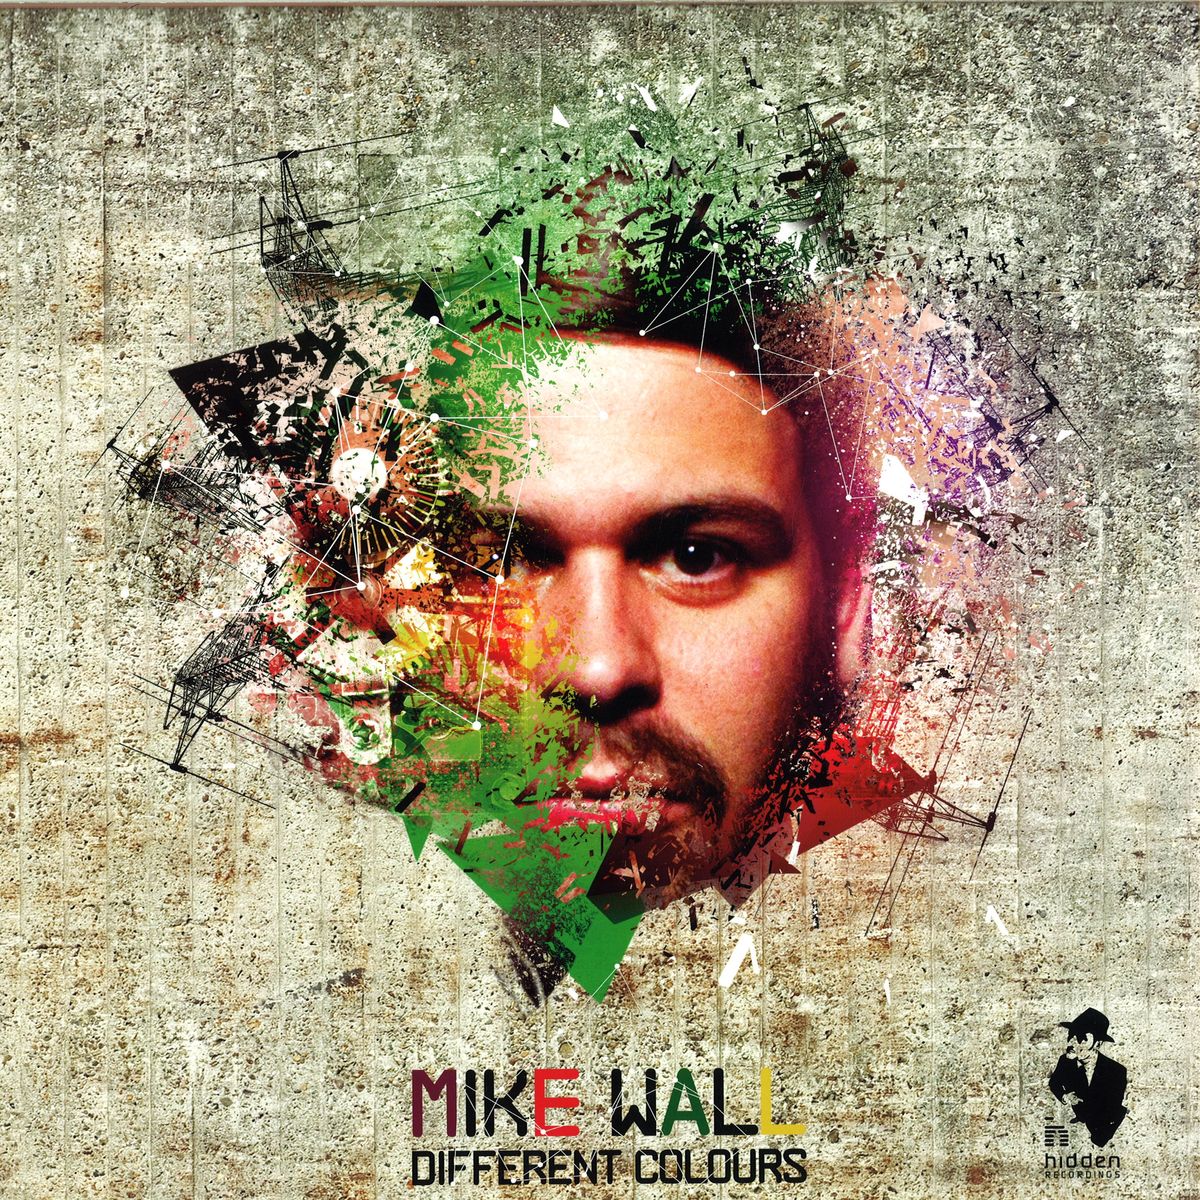 Mike Wall - Different Colours 2x12" / Hidden Recordings HR001LP - 2x12inch